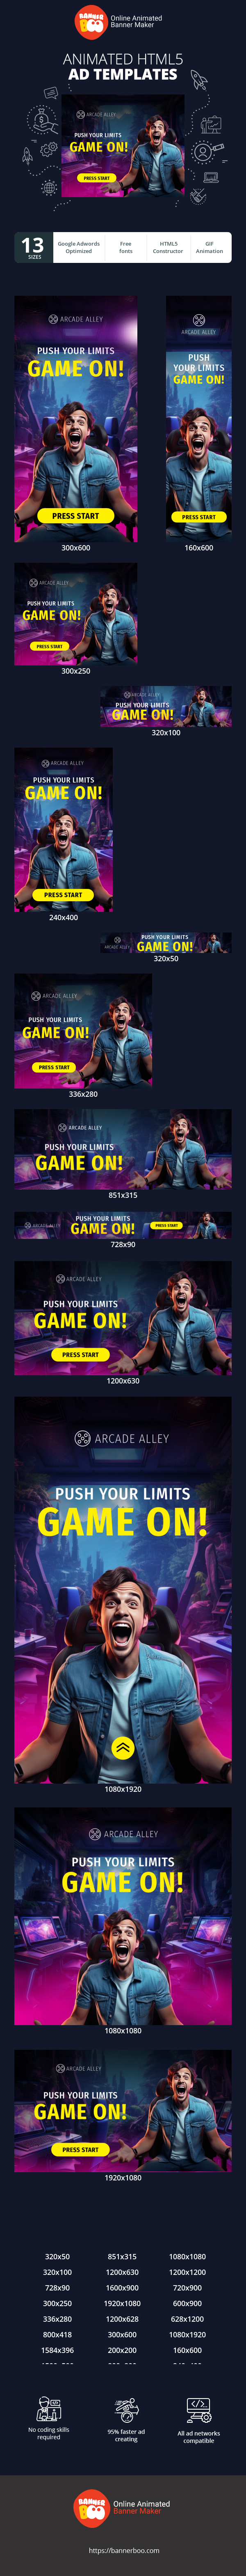 Banner ad template — Push Your Limits, Game On! — Gaming